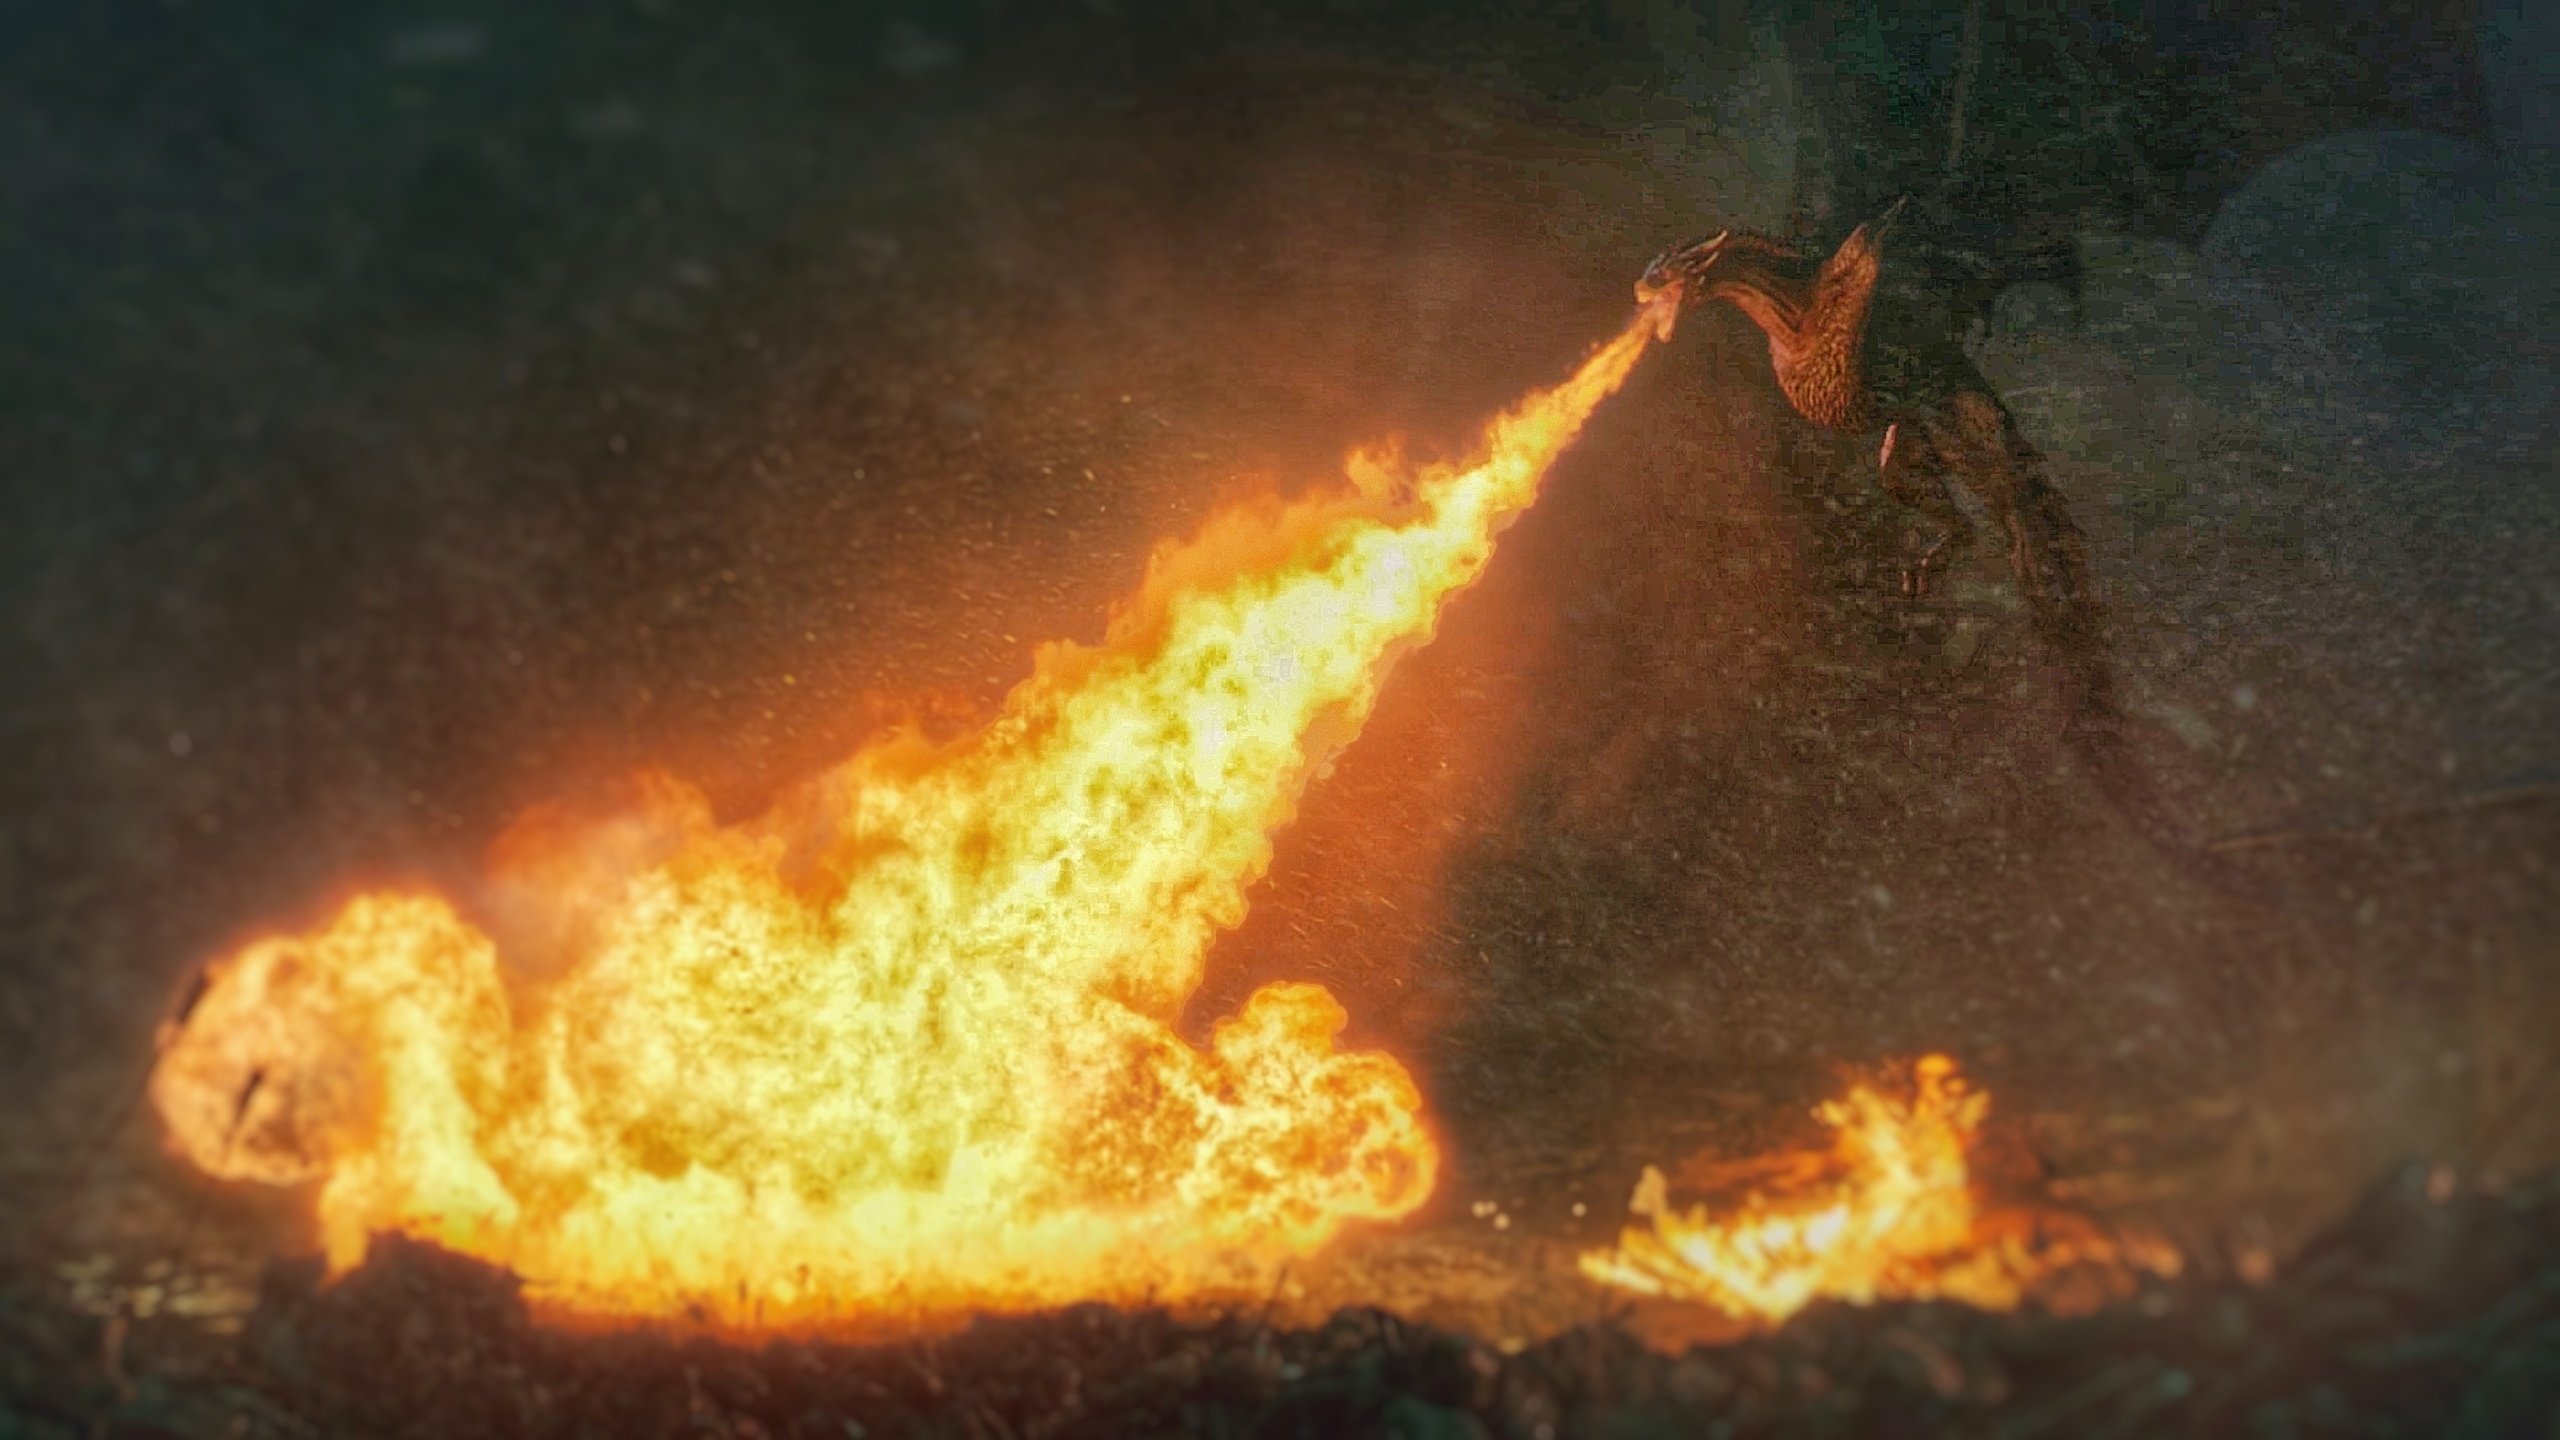 Dracarys 4K wallpaper for your desktop or mobile screen free and easy to download